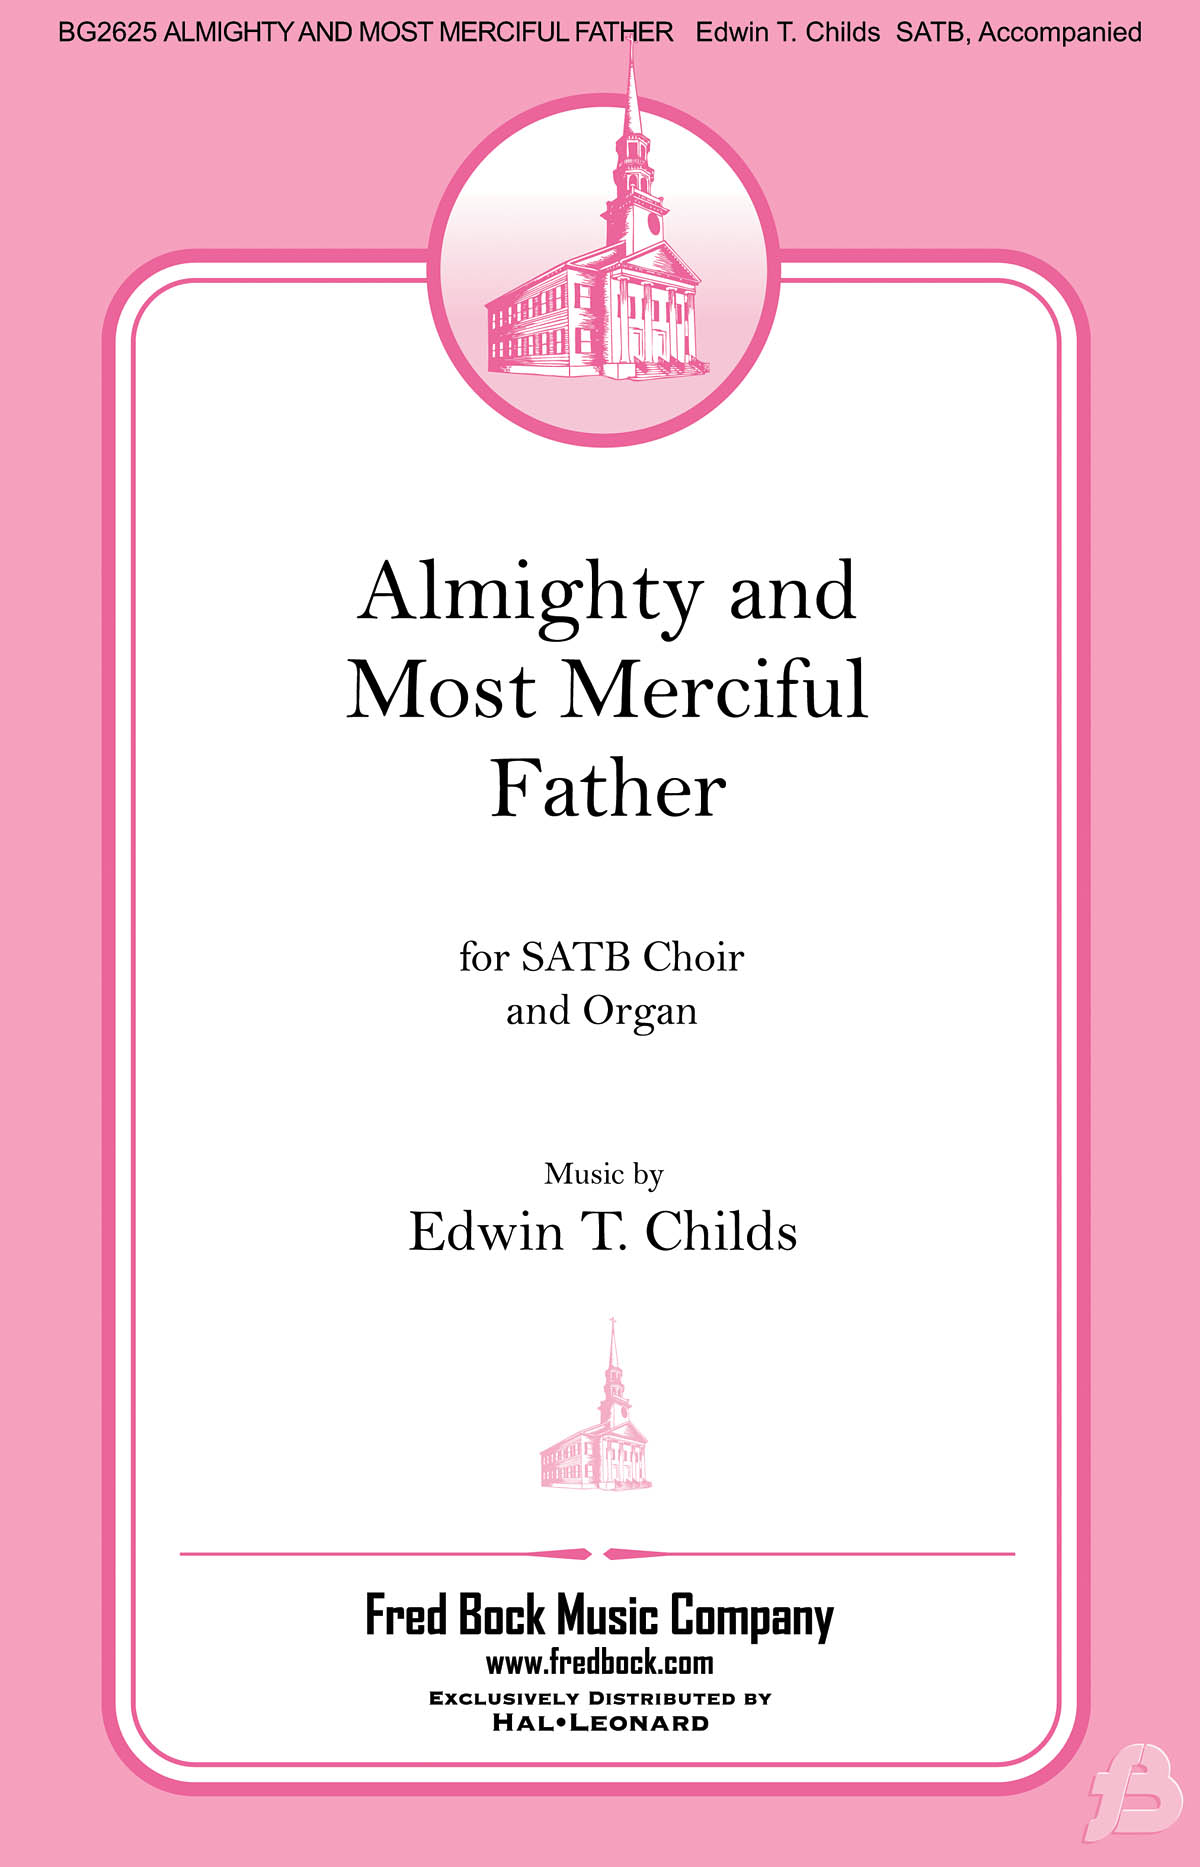 Edwin T. Childs: Almighty and Most Merciful Father: Mixed Choir a Cappella: